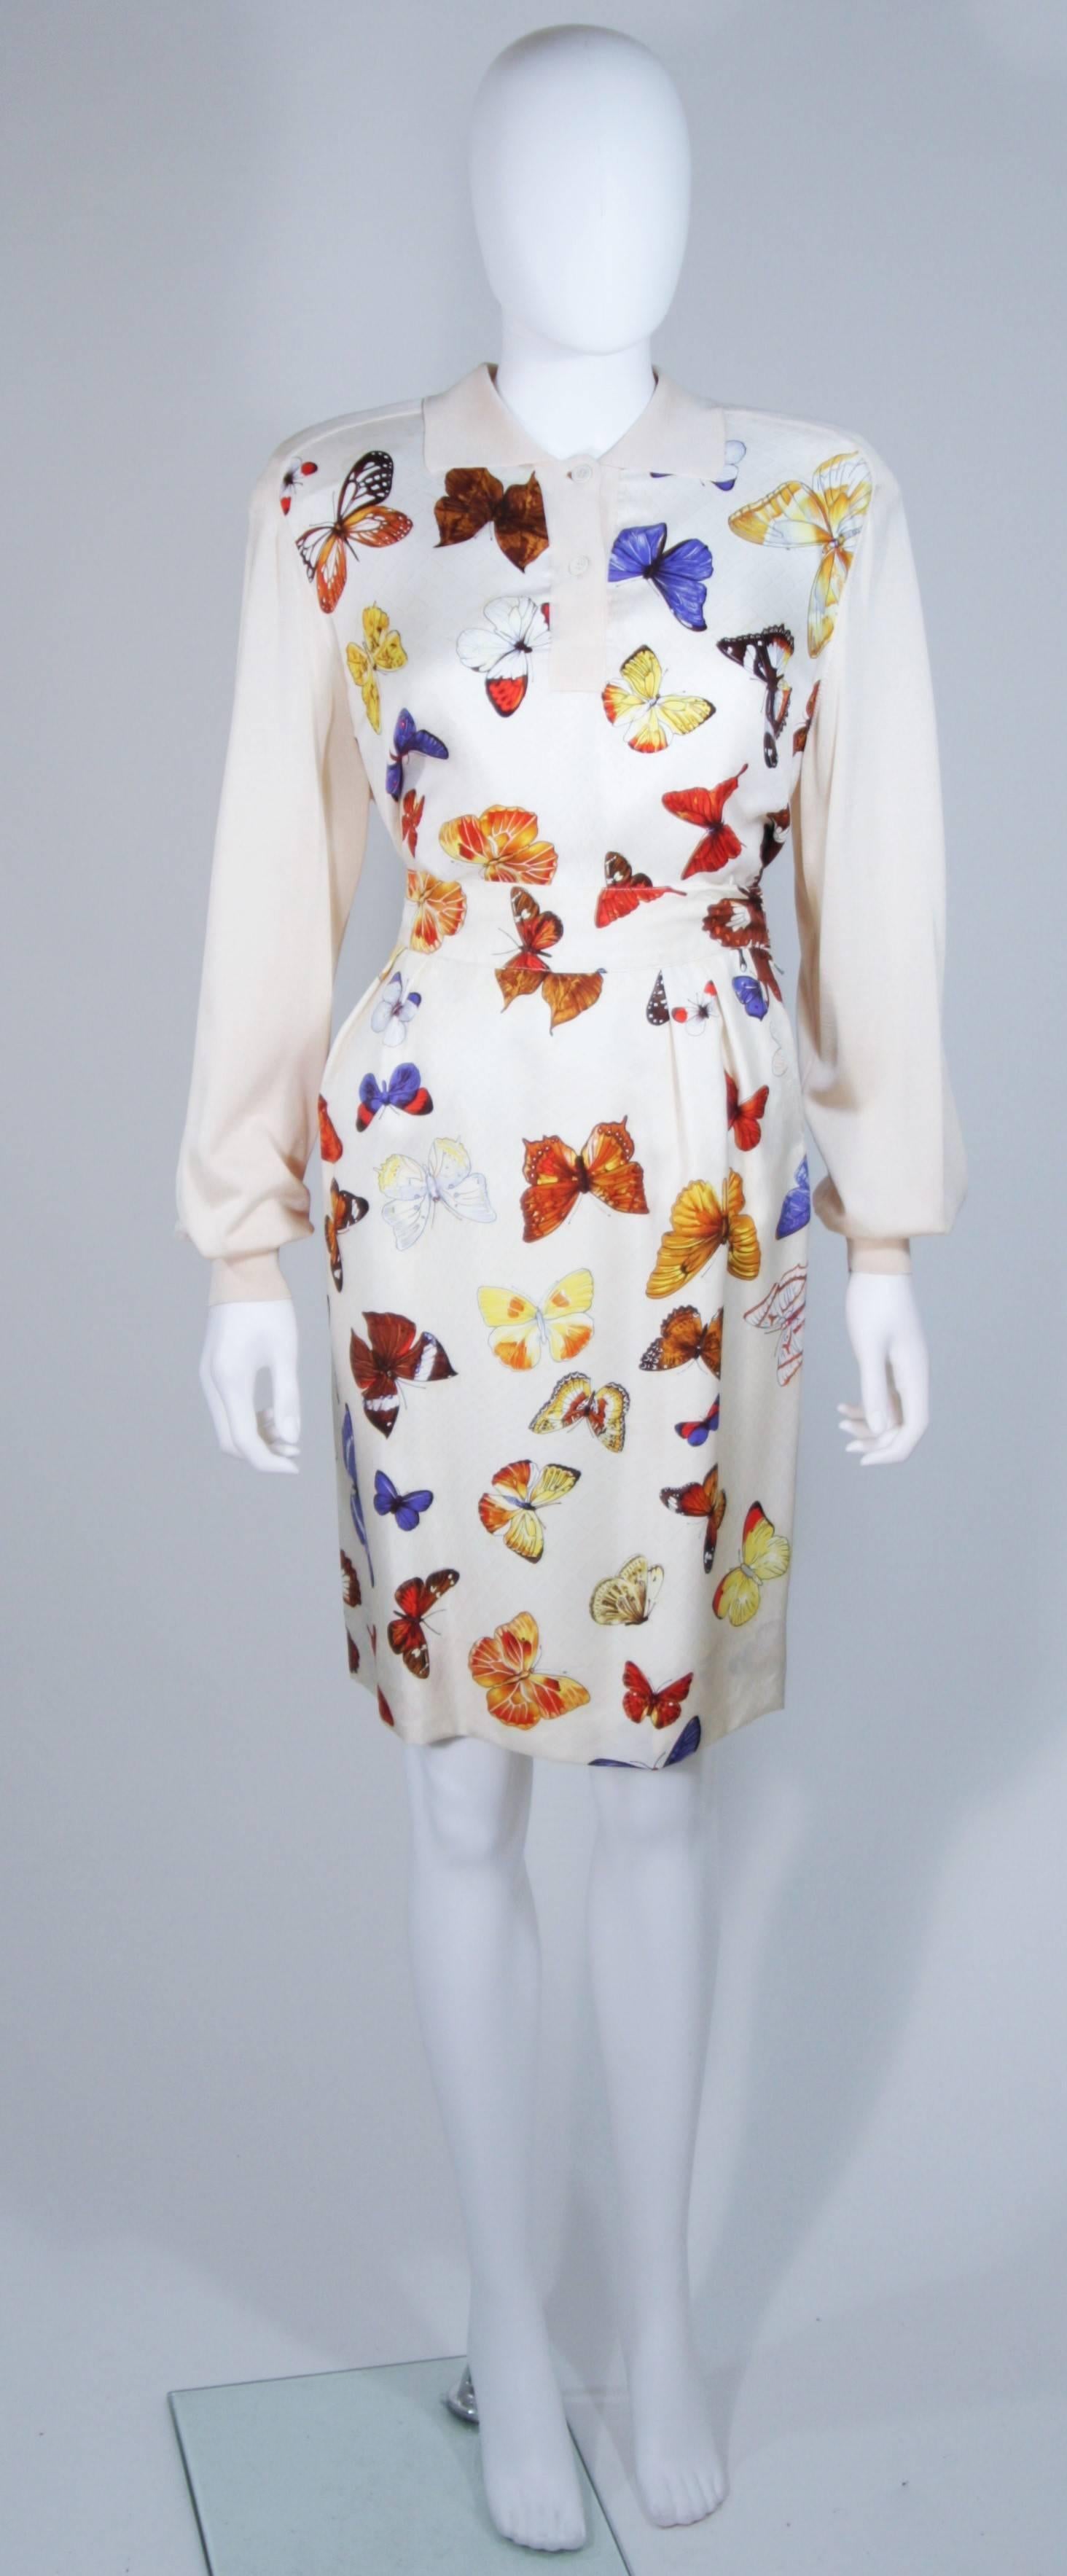 This Hermes skirt set is composed of a cream silk with butterfly print. The pullover style sweater features a classic collar with 2 gold button closures. The pleat front skirt has side pockets and a zipper closure. In excellent vintage condition.